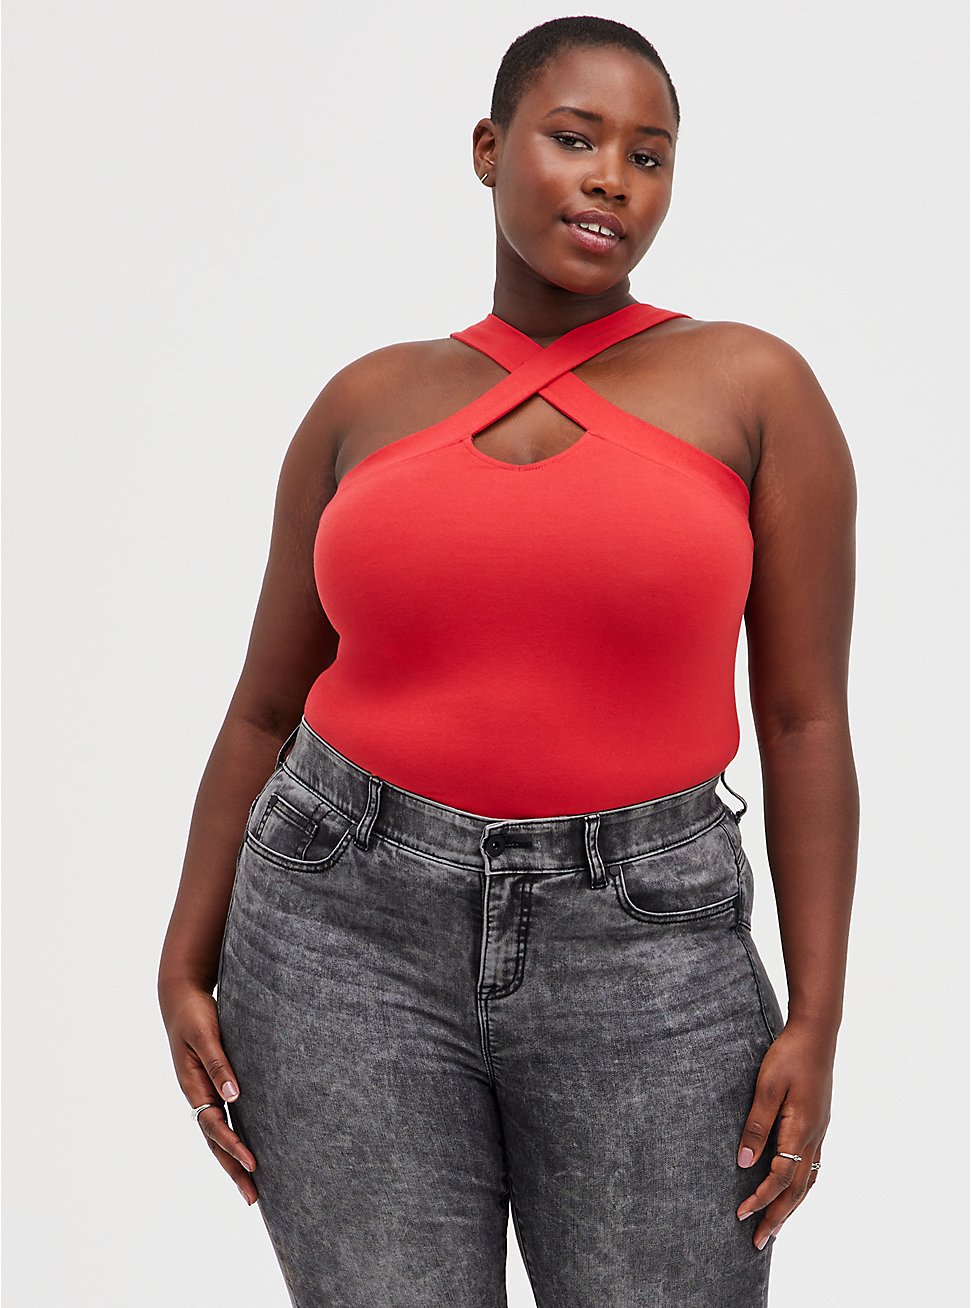 Plus Size Foxy High Neck Criss Cross Halter Top, RED, hi-res